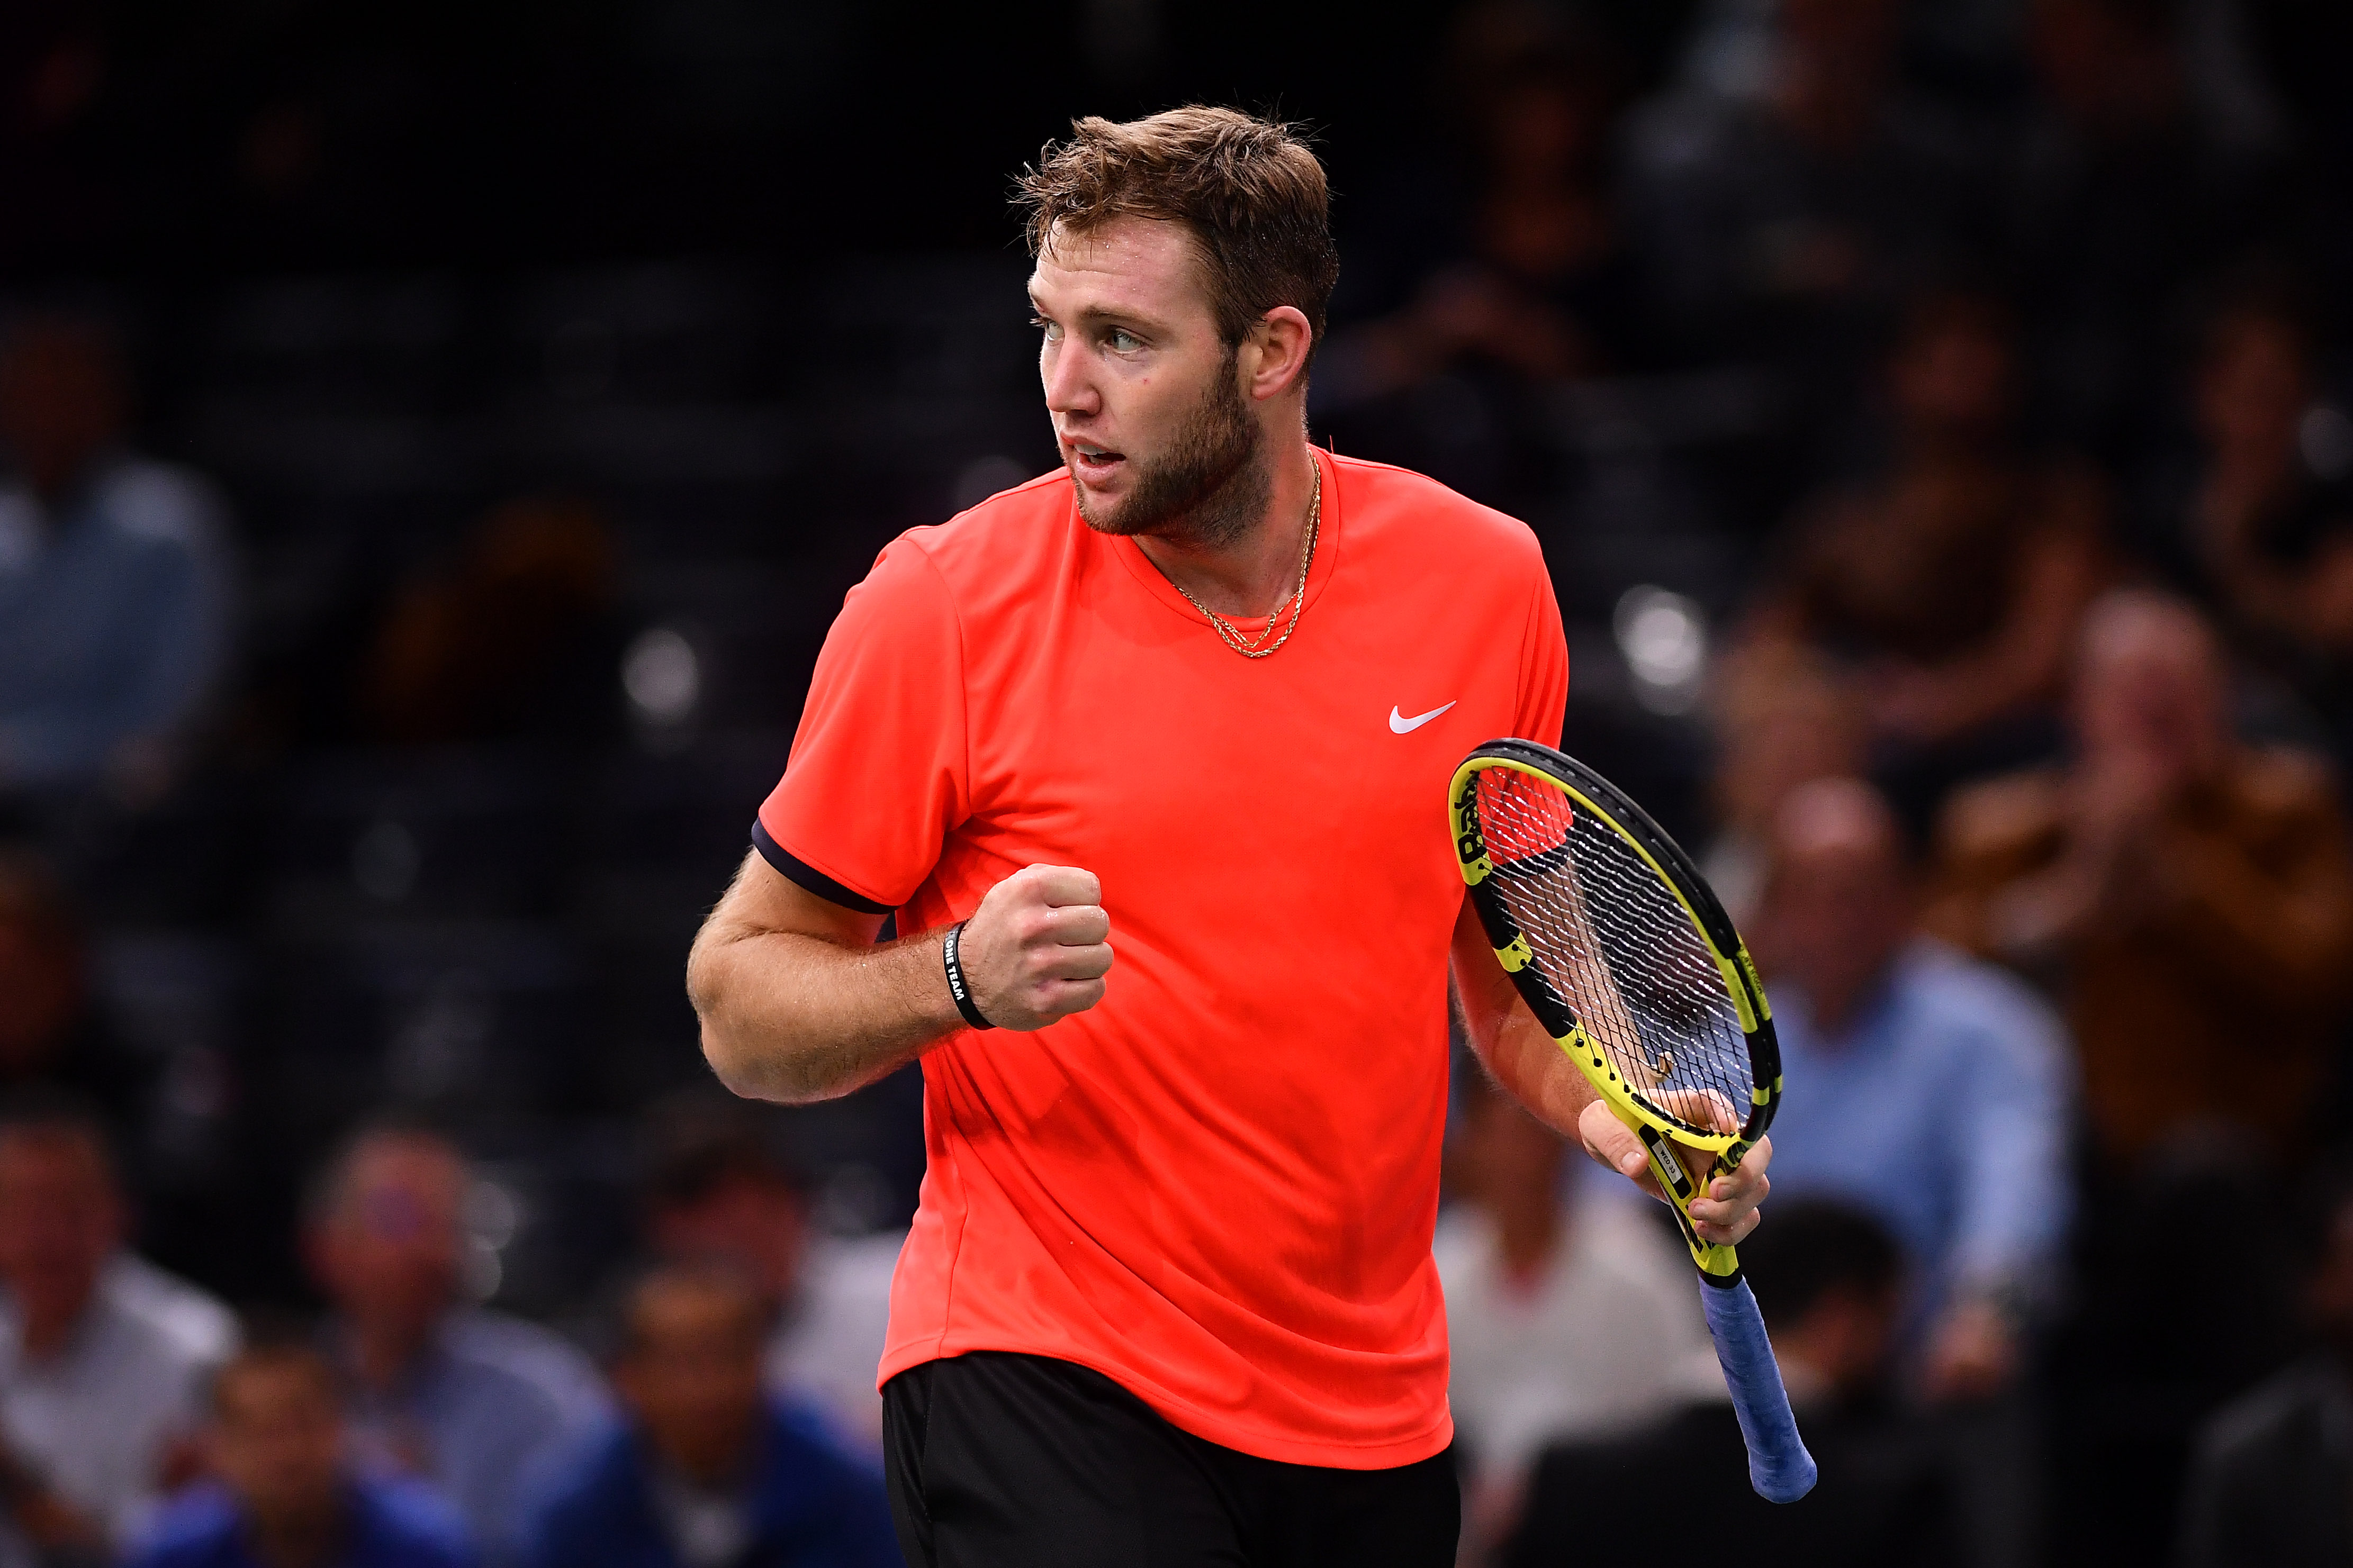 Sock opens Paris title defense with win over Frenchman Gasquet